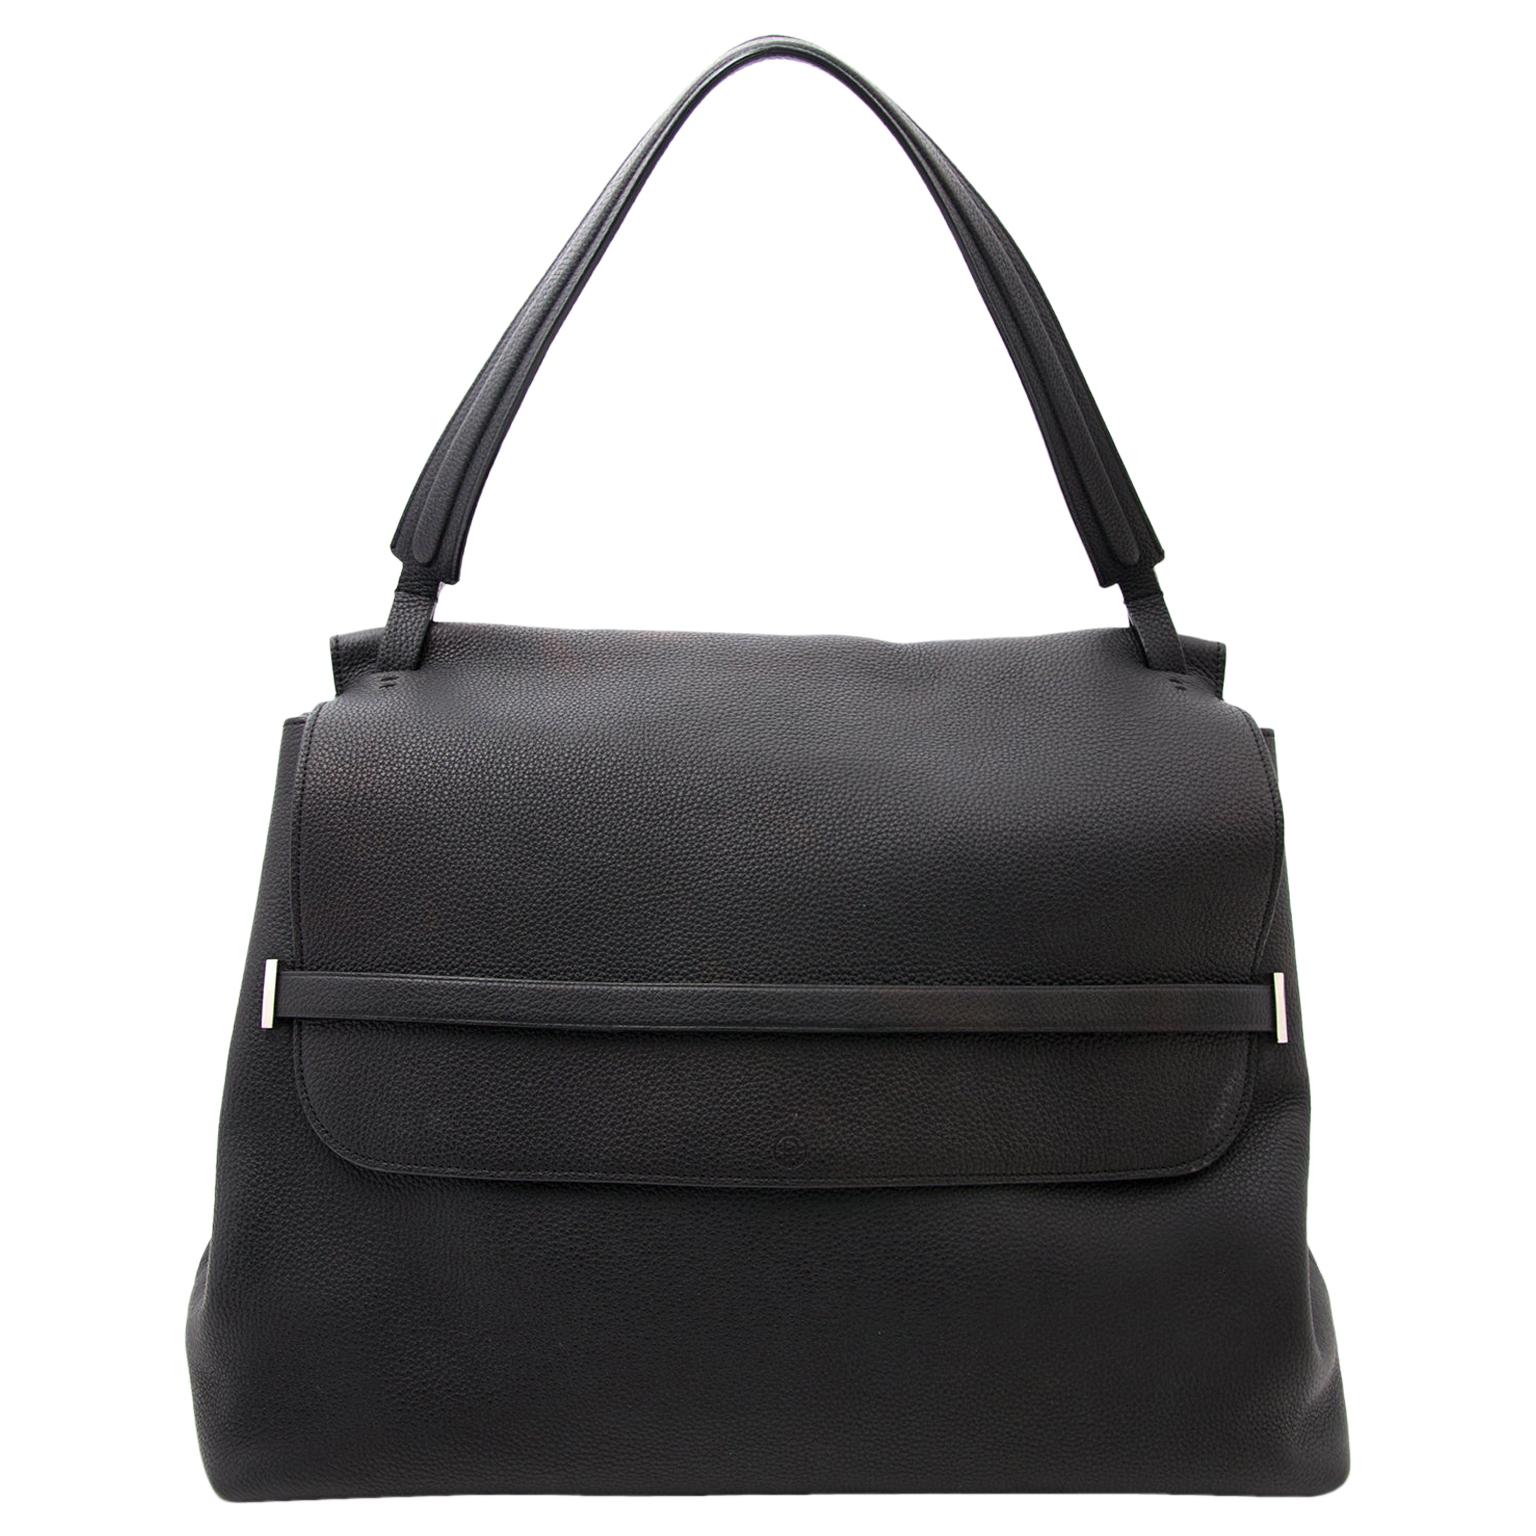 The Row Black Leather Tote